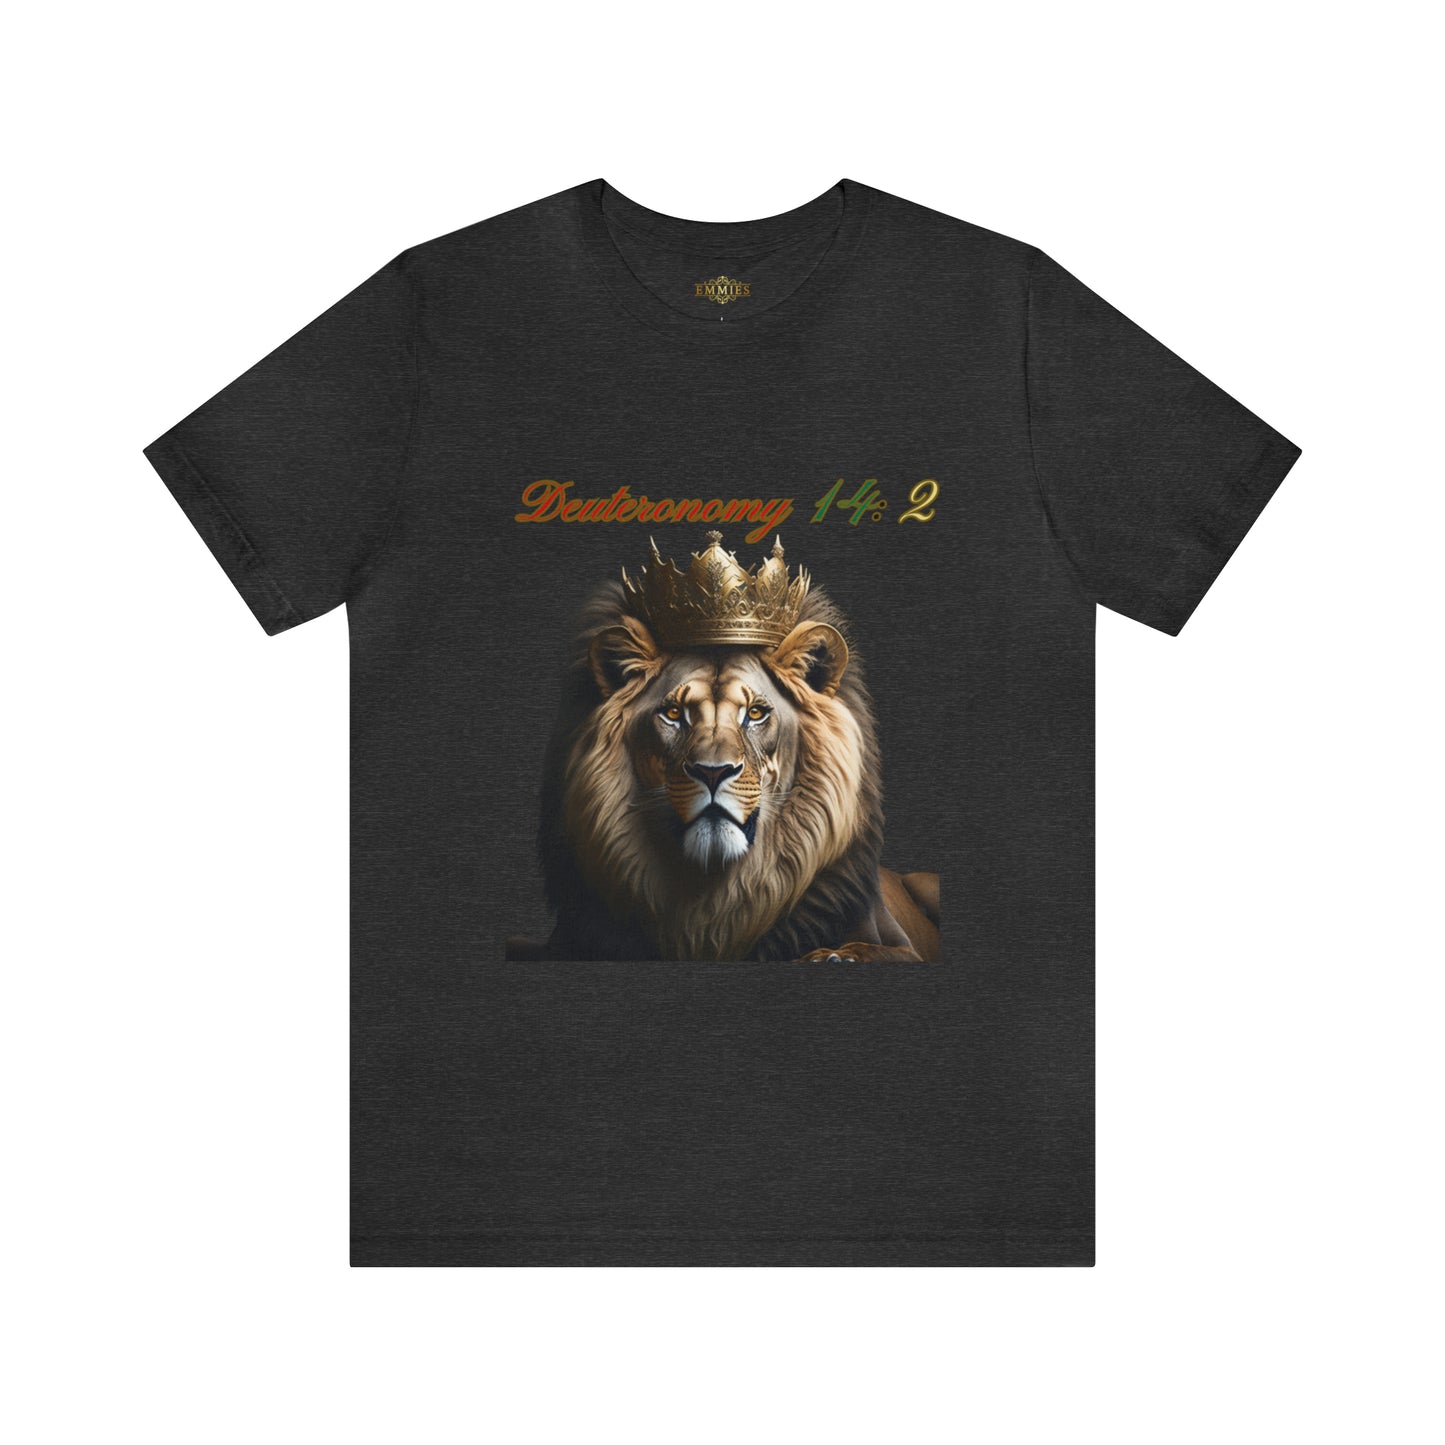 The Majestic Lion of Judah: 12 Tribes Edition